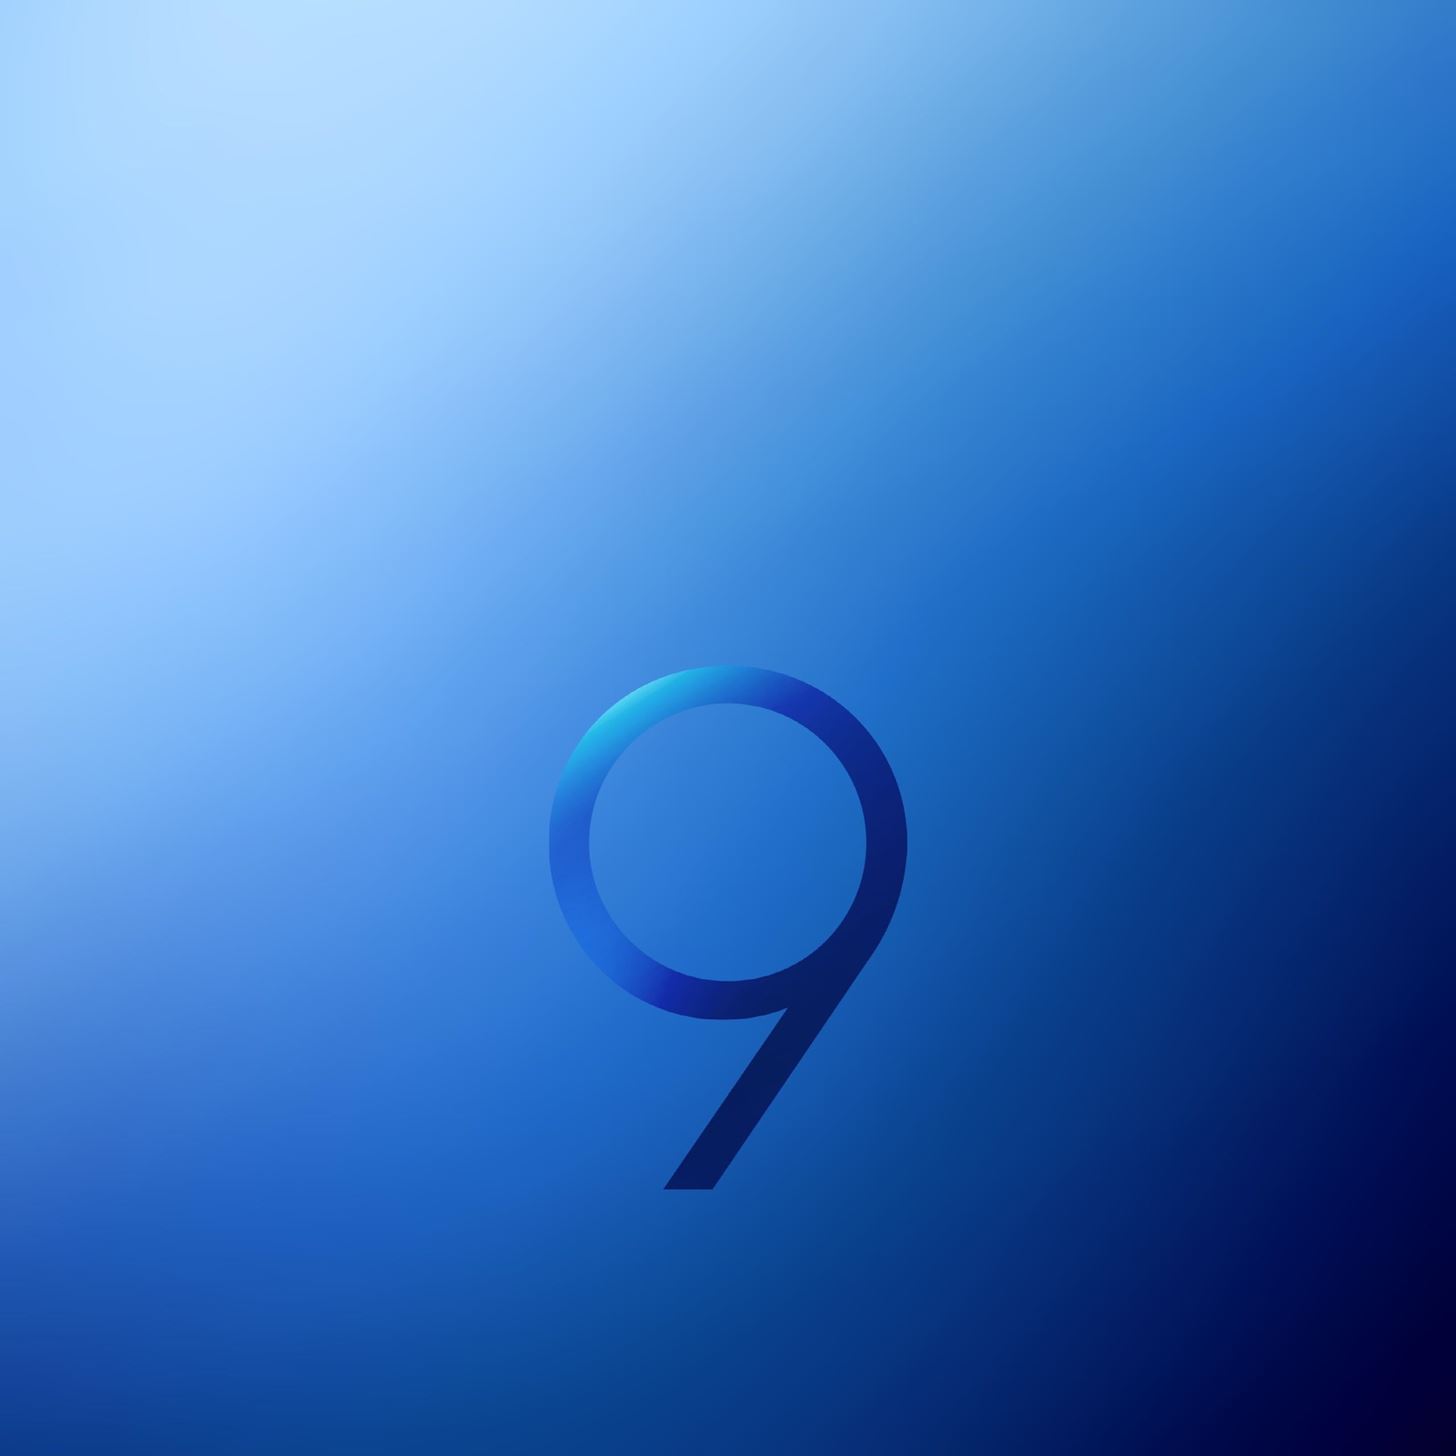 How to Get the Galaxy S9's New Wallpapers on Any Phone